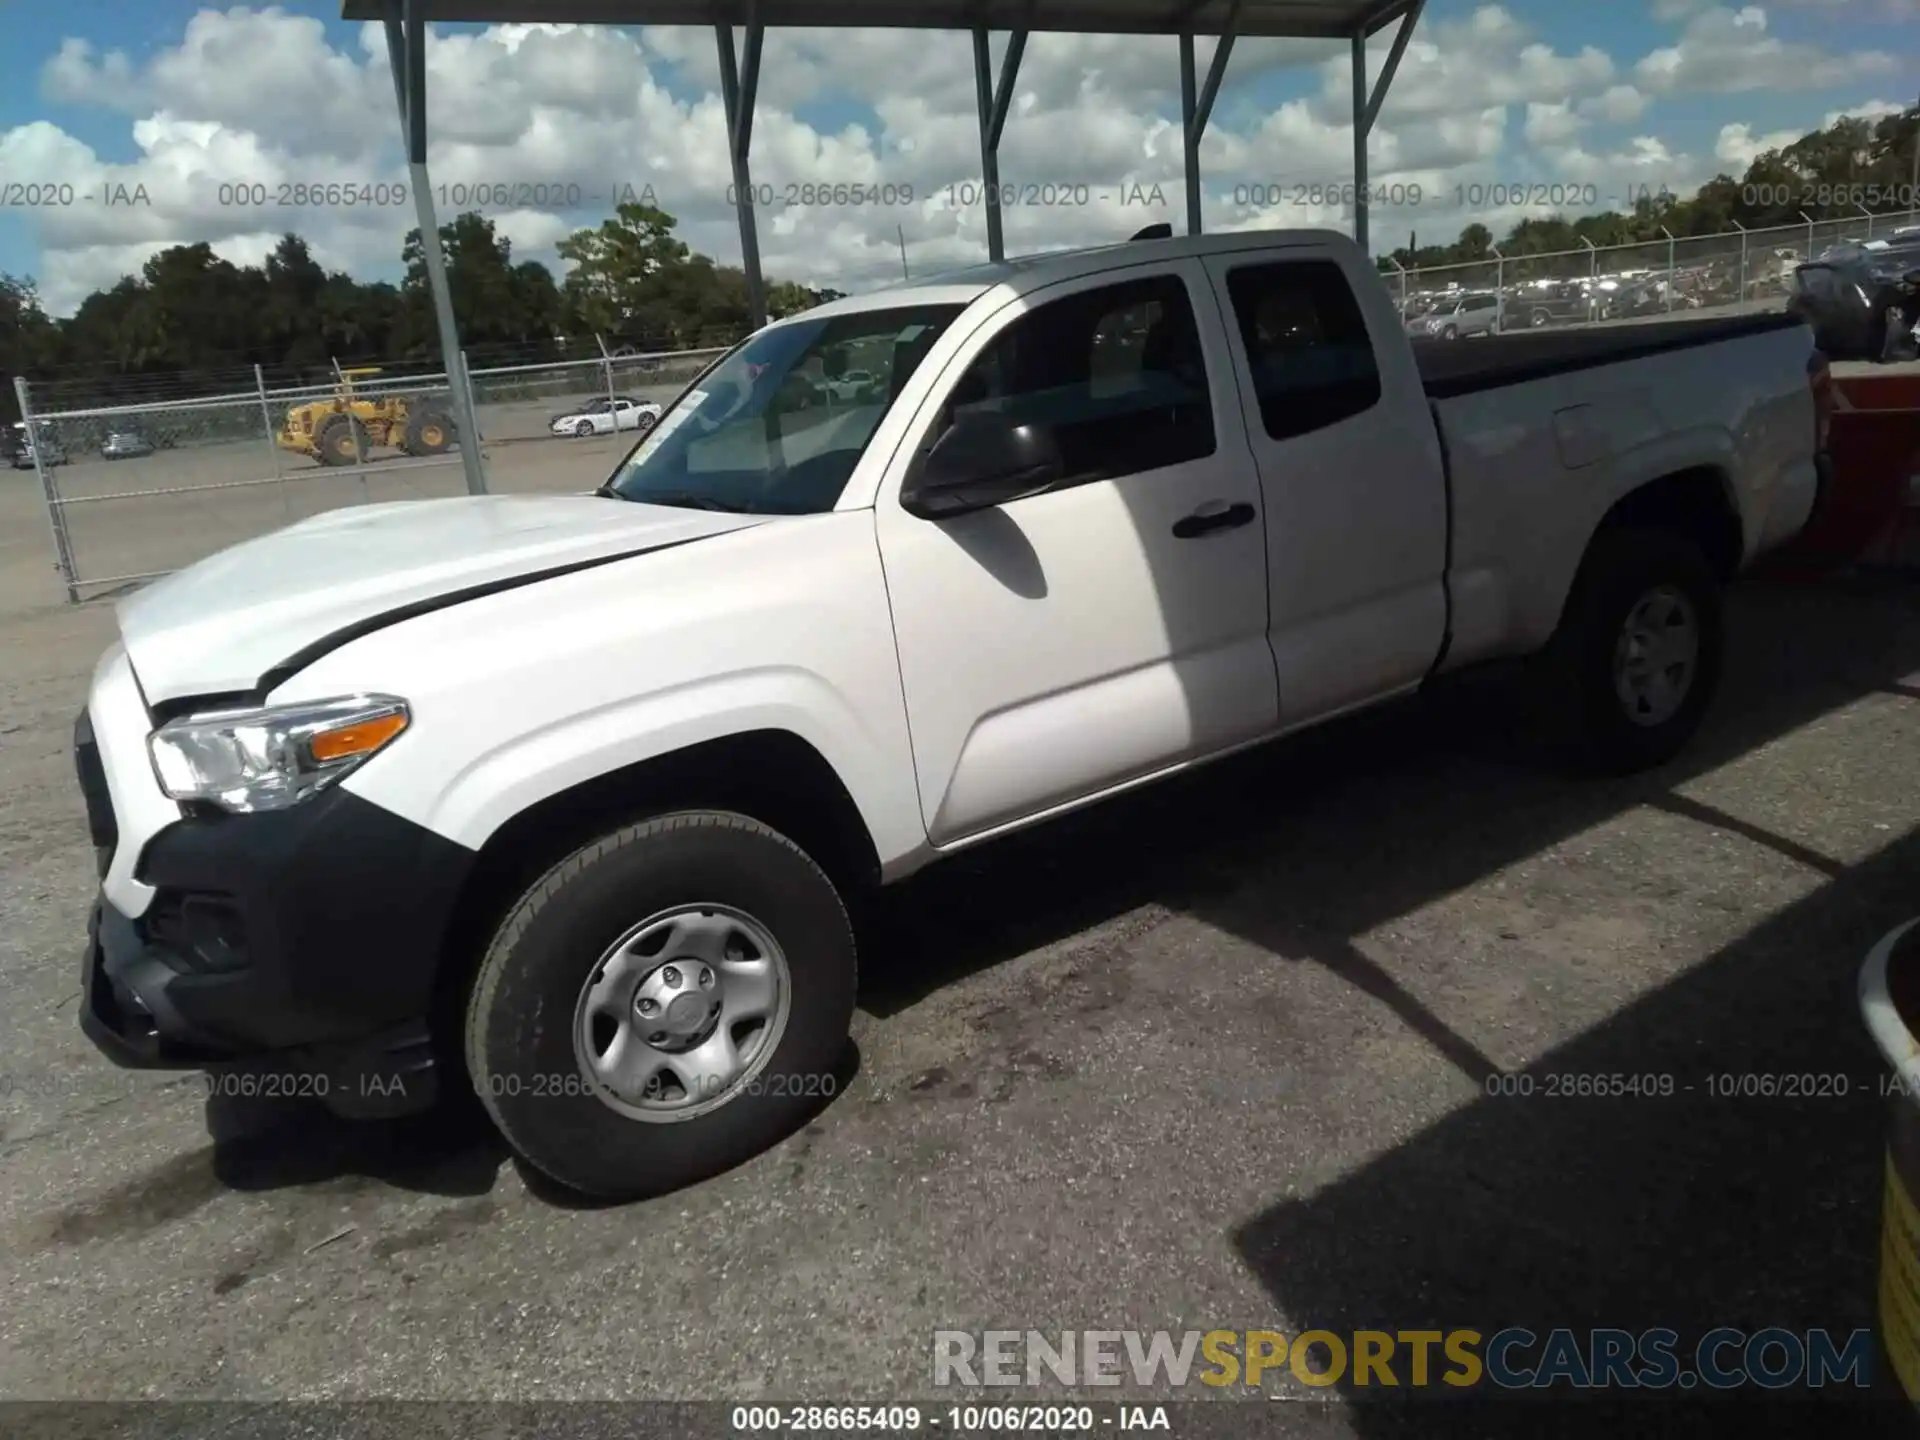 2 Photograph of a damaged car 5TFRX5GN9LX171570 TOYOTA TACOMA 2WD 2020